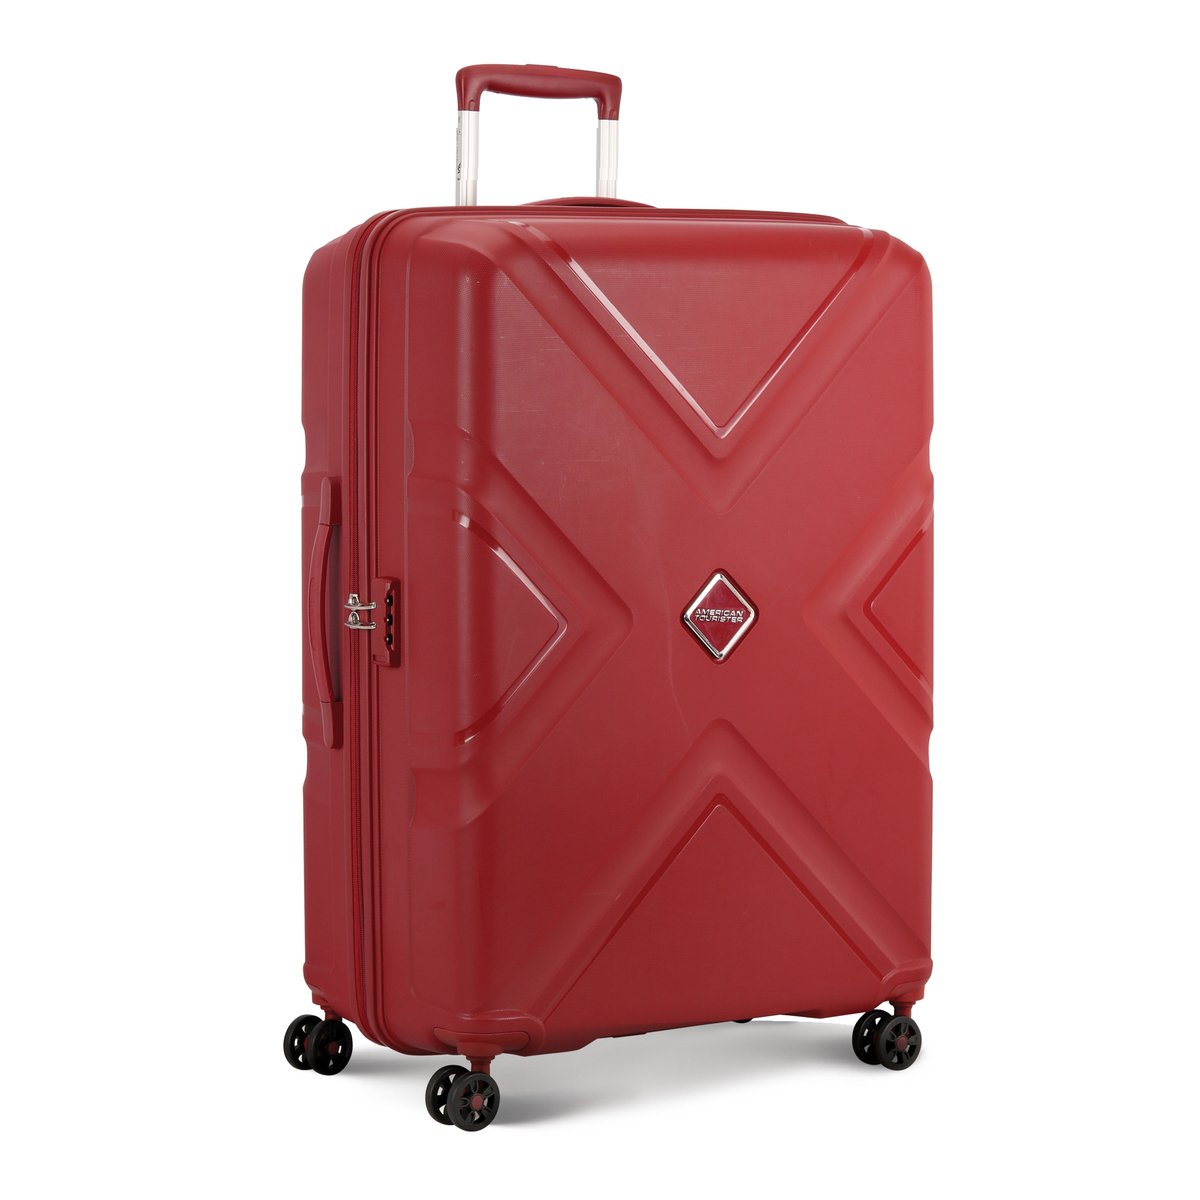 American Tourister Kross 4Wheel Hard Trolley 55cm Red Color